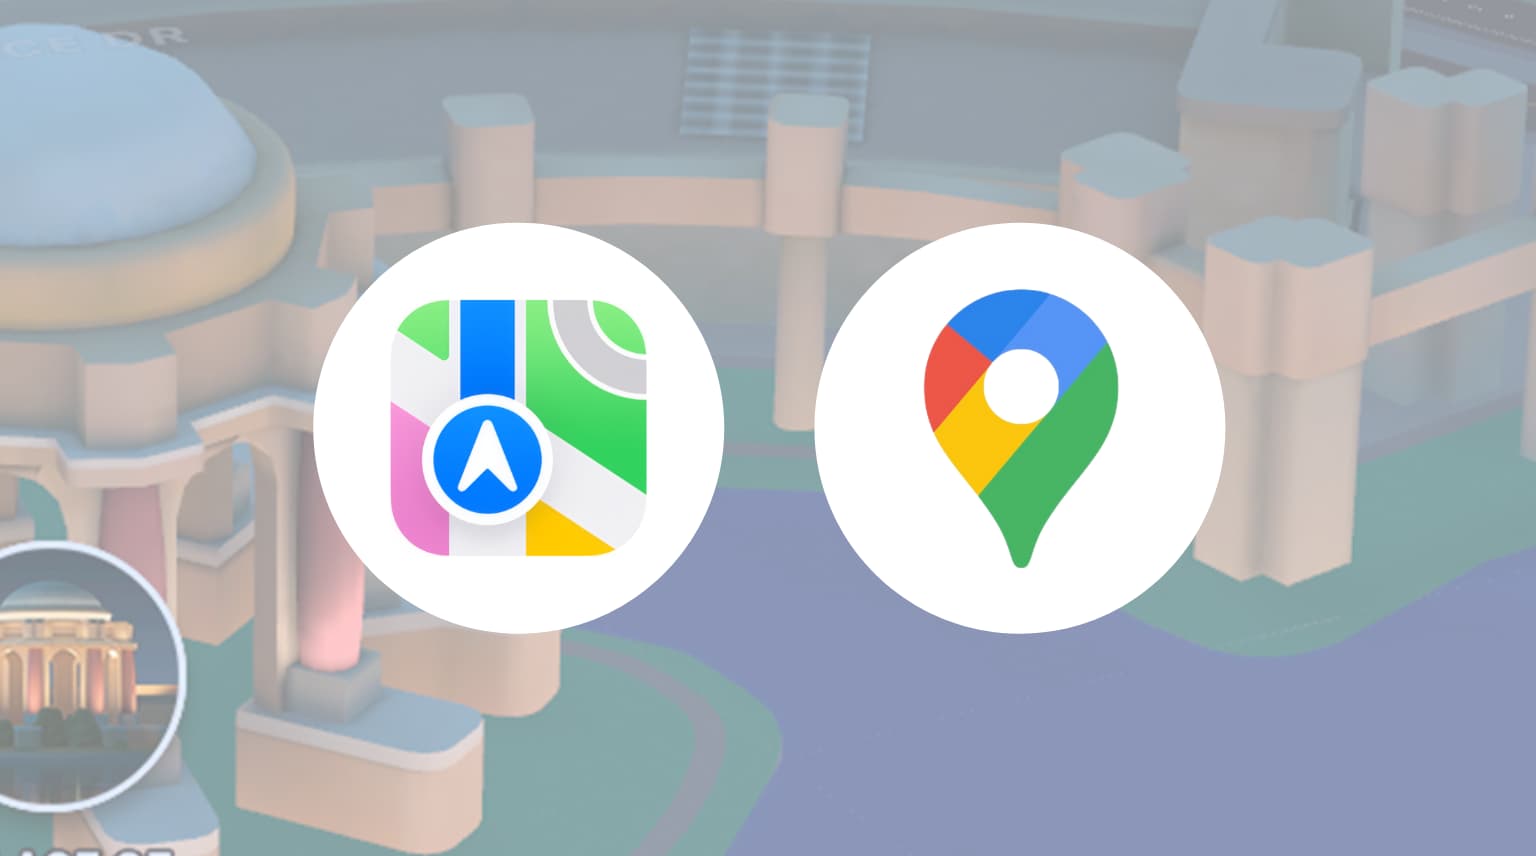 Localisation Changer app lets TrollStore users spoof their current location